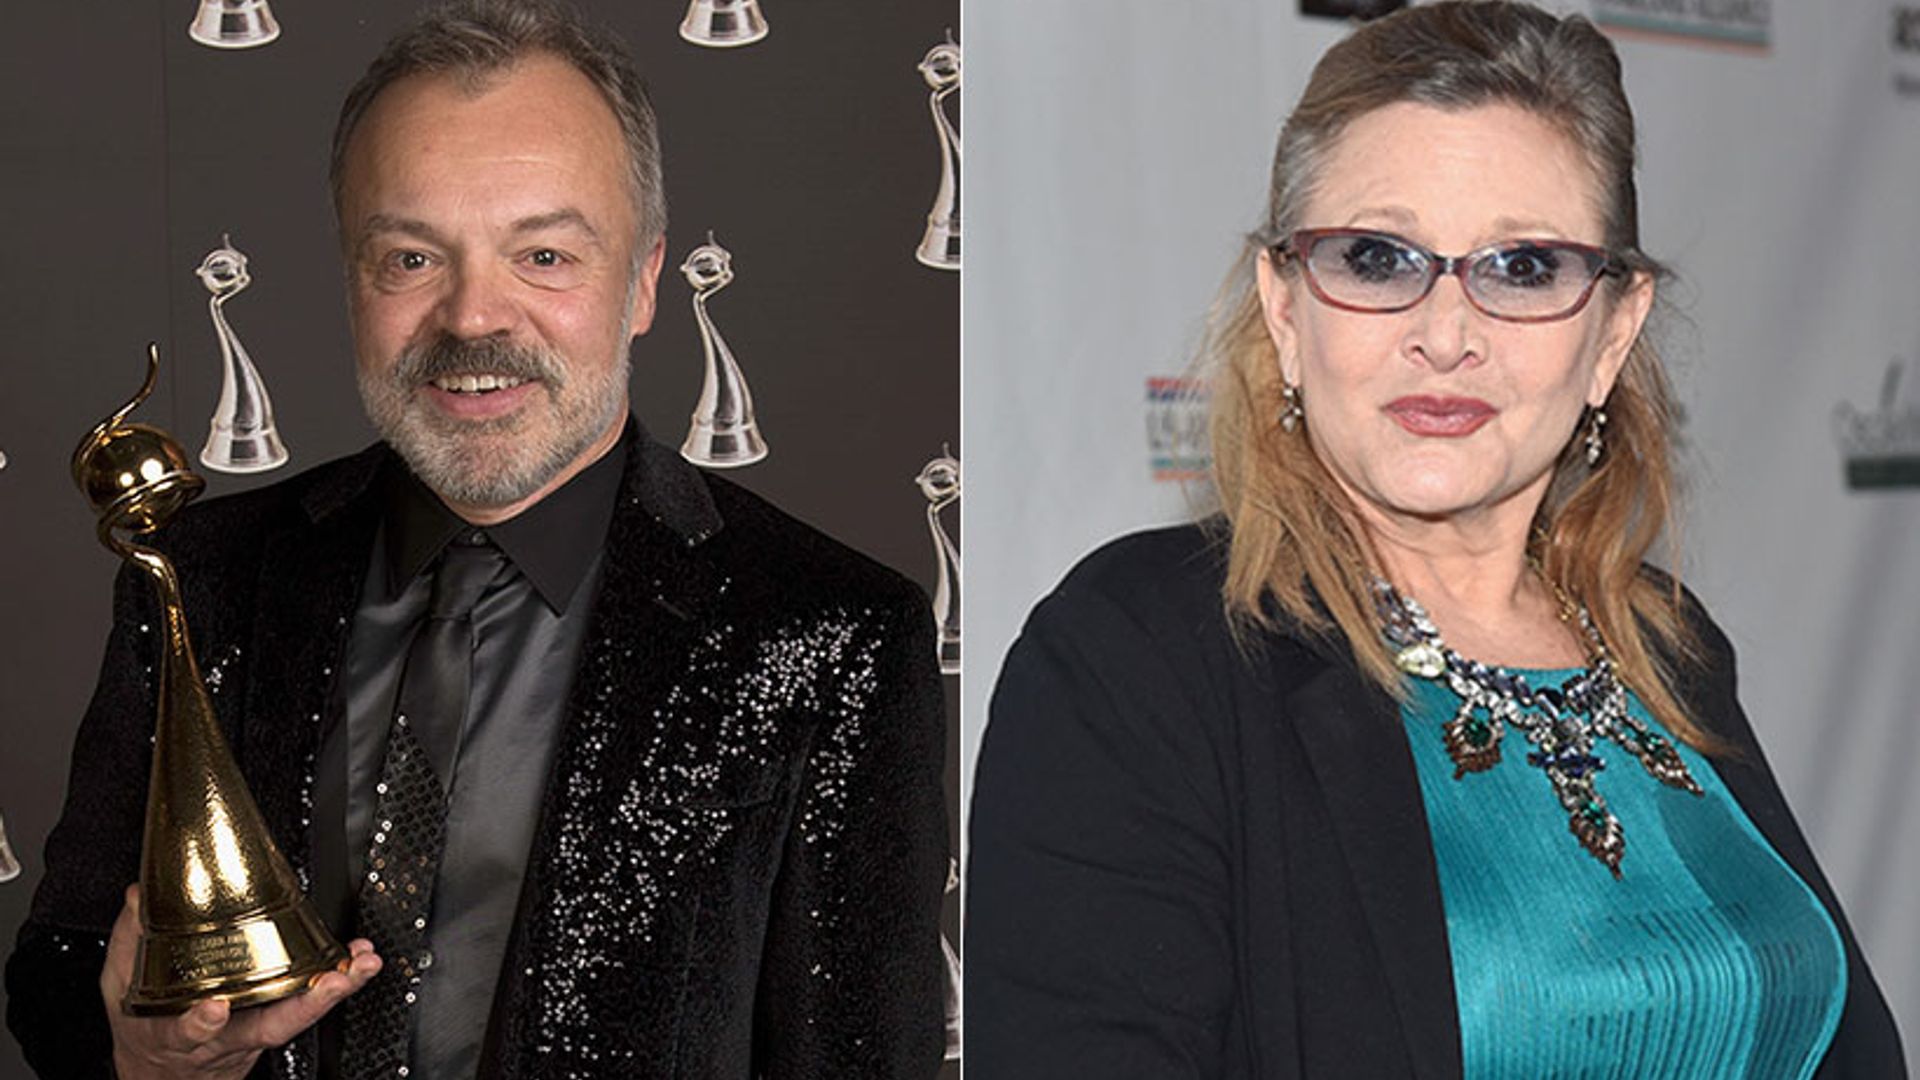 Graham Norton pays heartfelt tribute to close friend Carrie Fisher at the NTAs: 'She will live on forever'